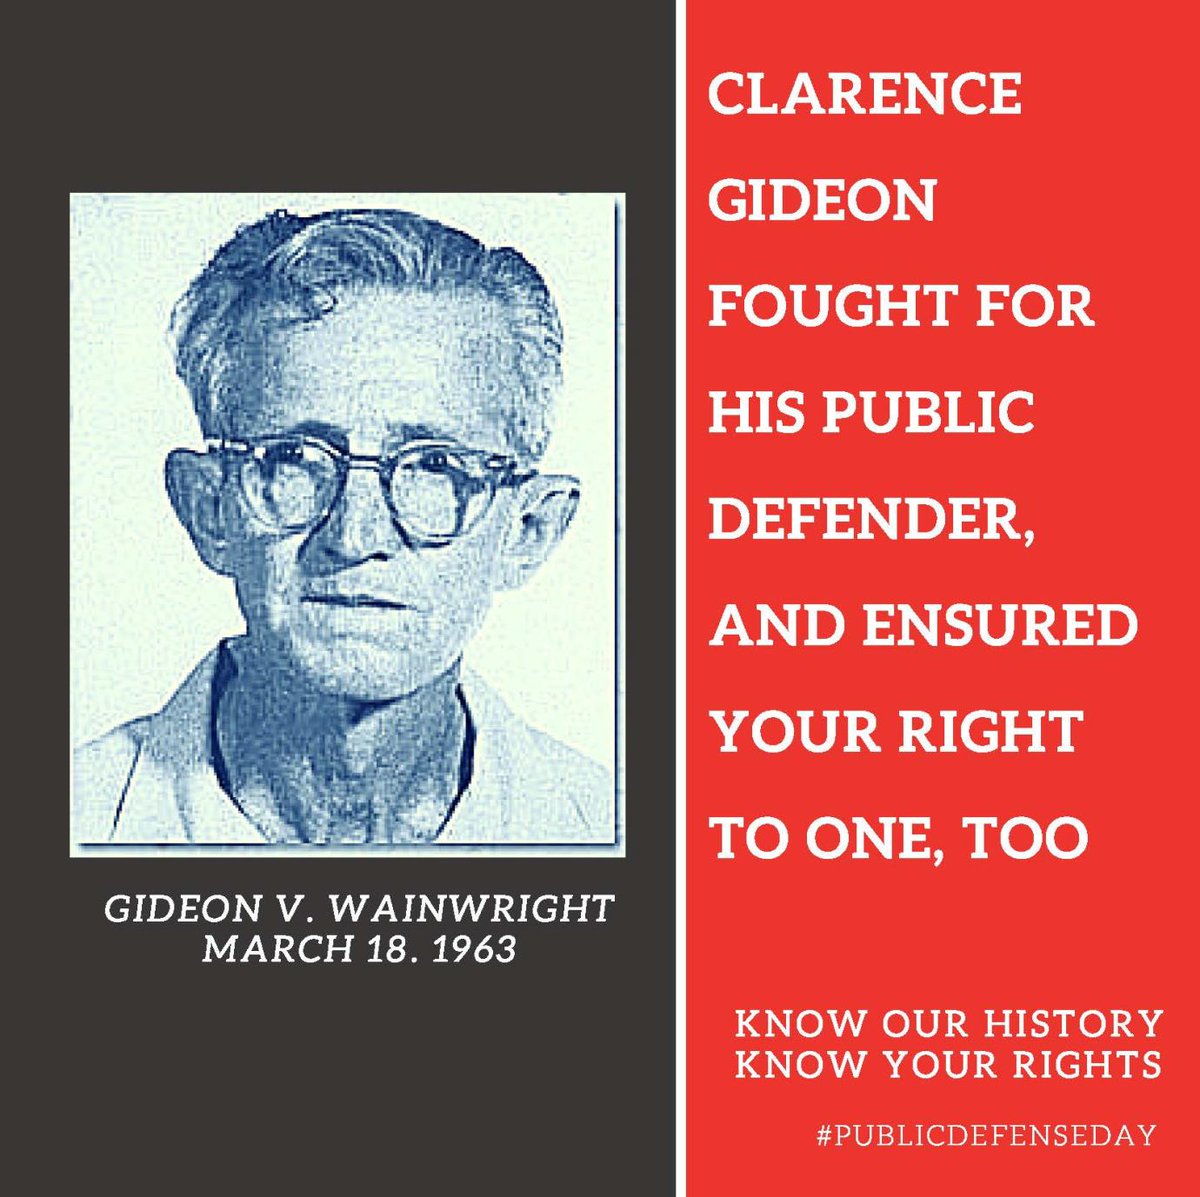 Happy #PublicDefenseDay ! Today marks the 60th anniversary of Gideon v. Wainwright, the landmark casein which US Supreme Court unanimously declared that indigent defendants have a constitutional right to a court-appointed lawyer.